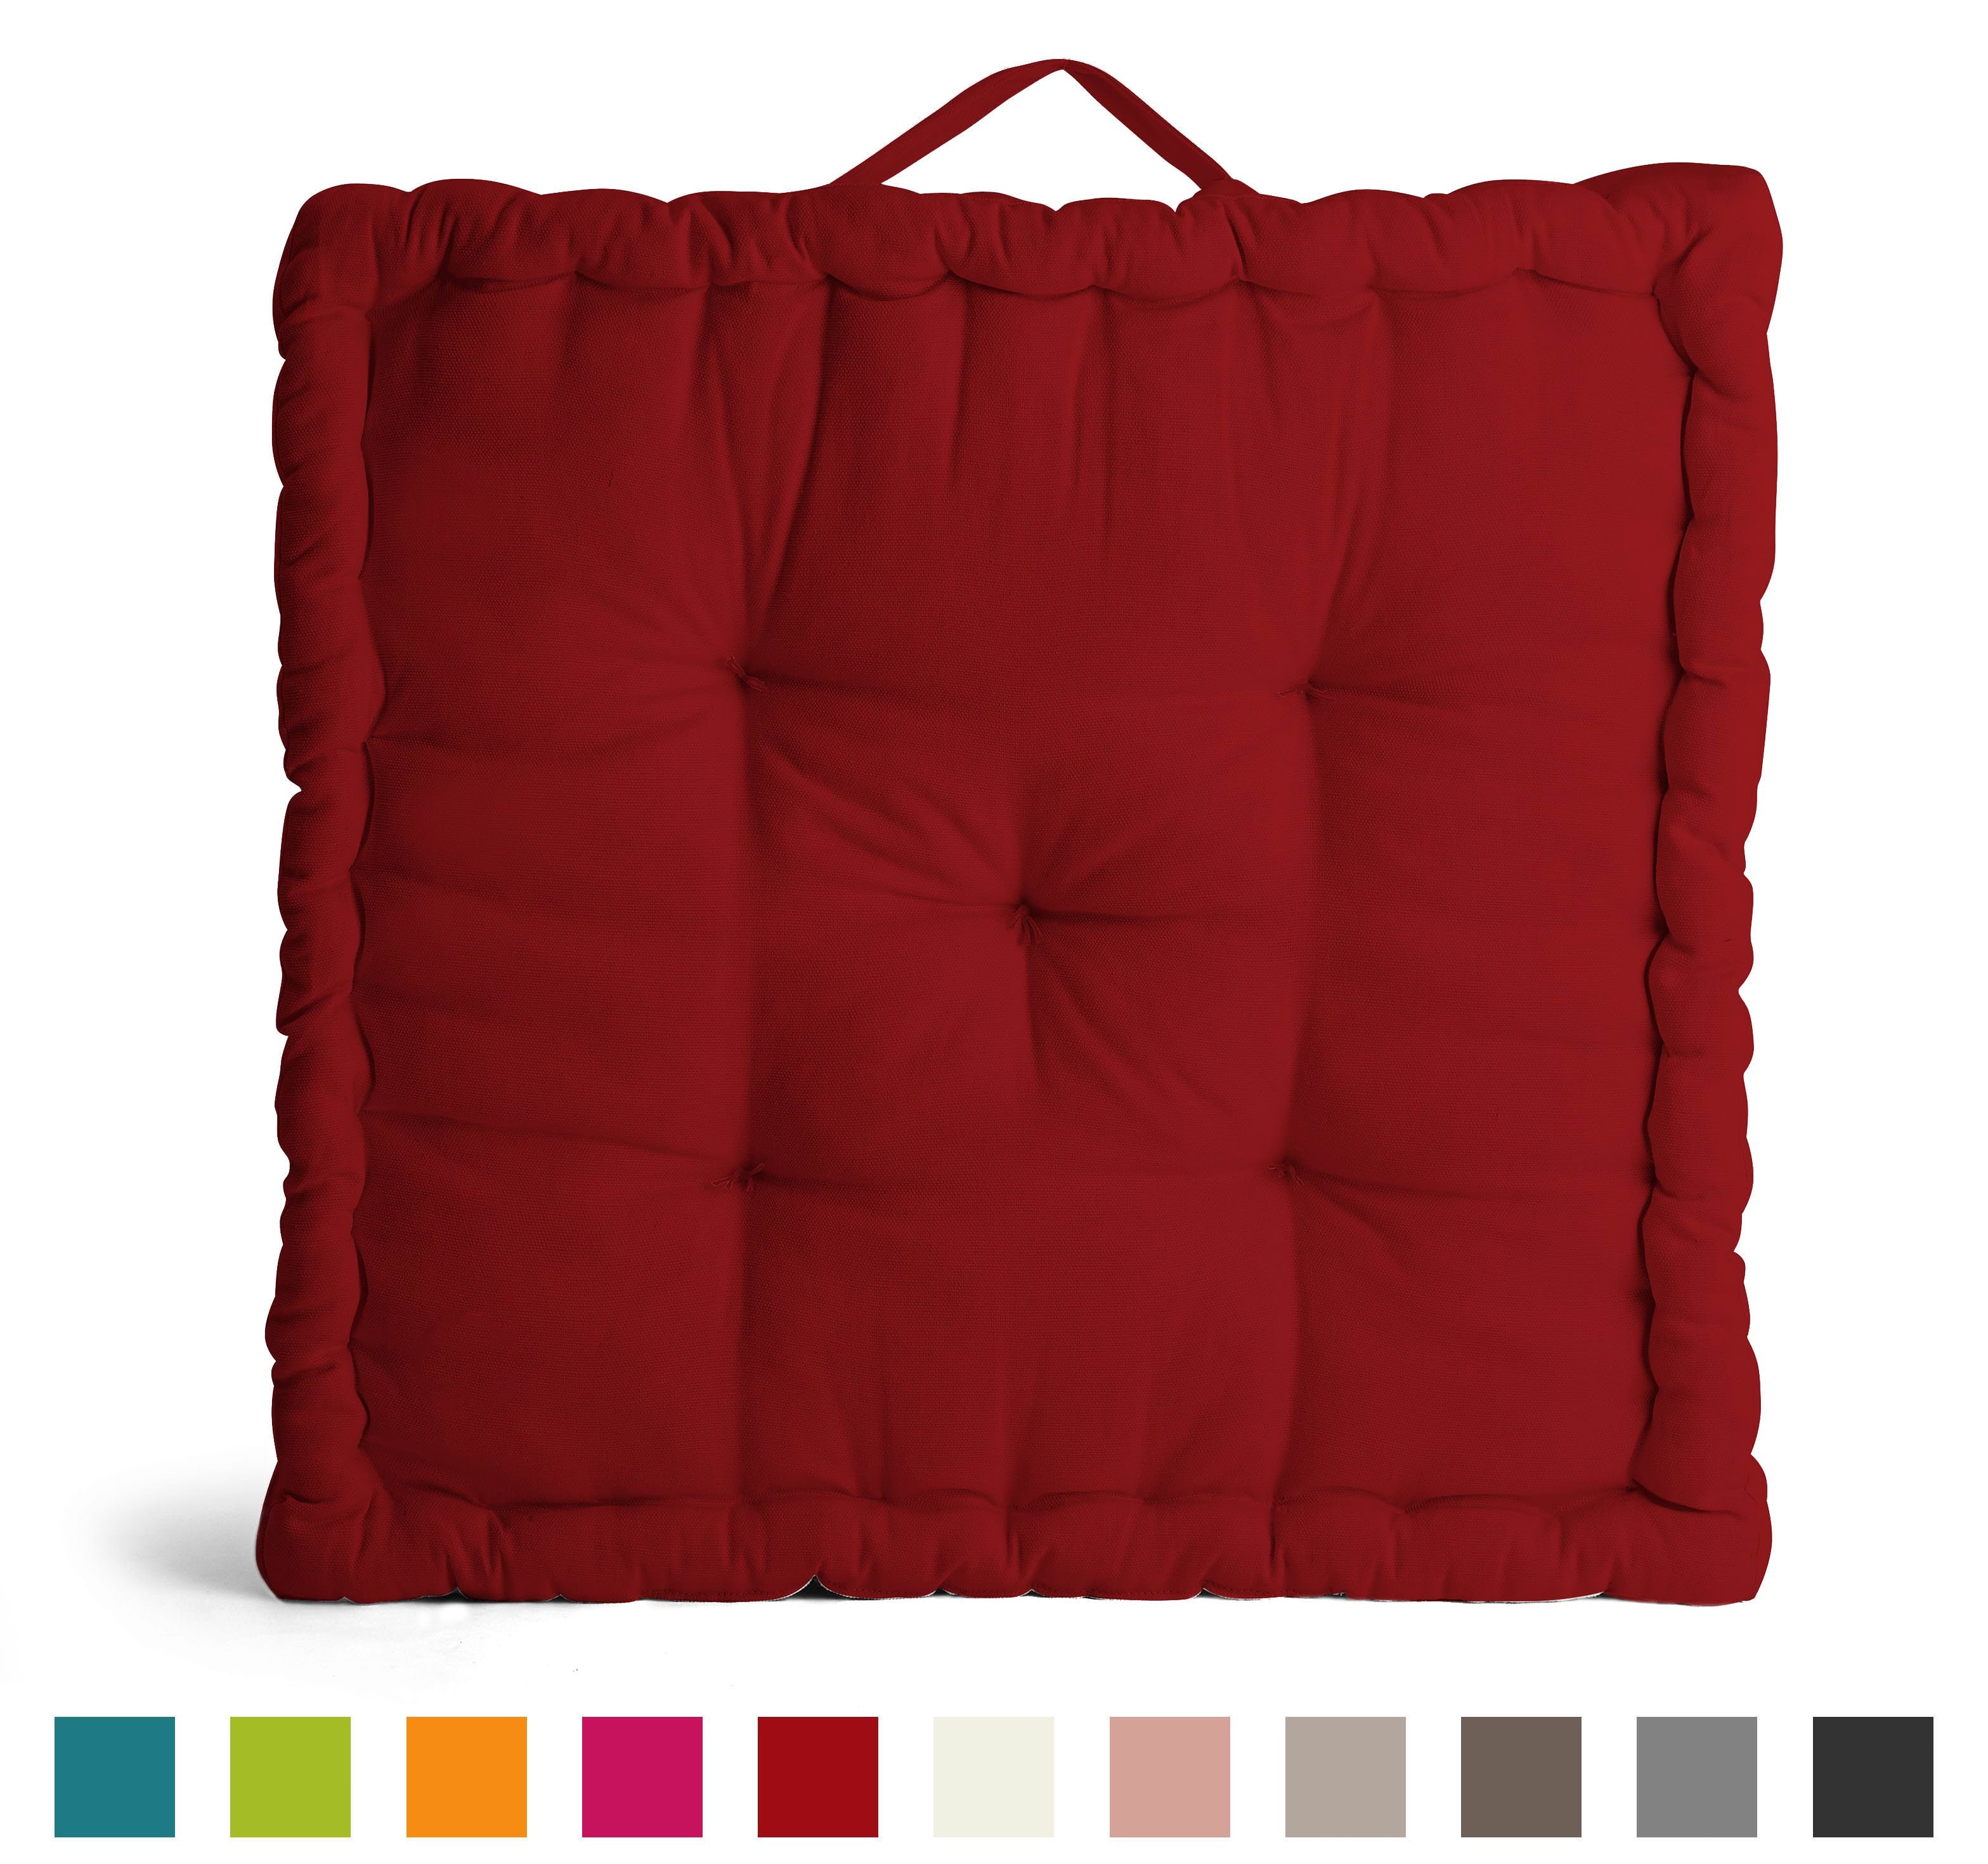 Encasa Homes Rich Cotton Canvas Floor Cushions - Choice of 11 Colours and 3 Sizes - Size 60x60x10 cm, Deep Red